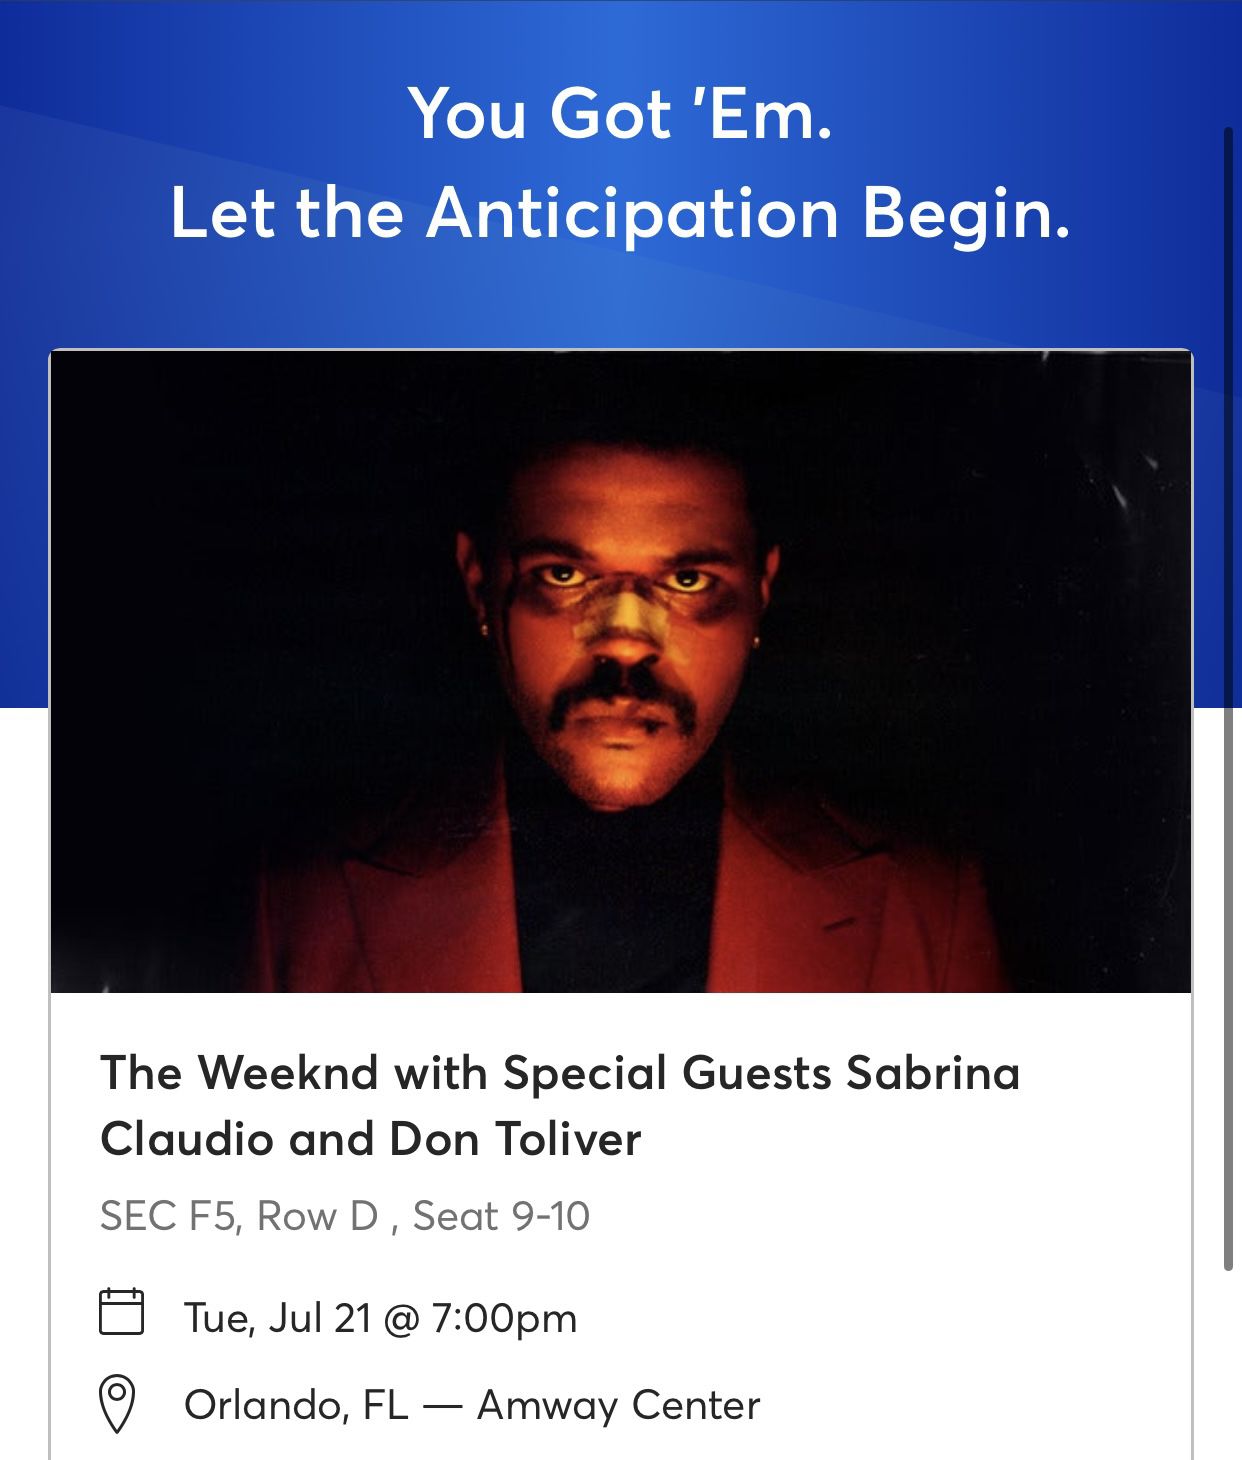 VIP THE WEEKND TICKETS!